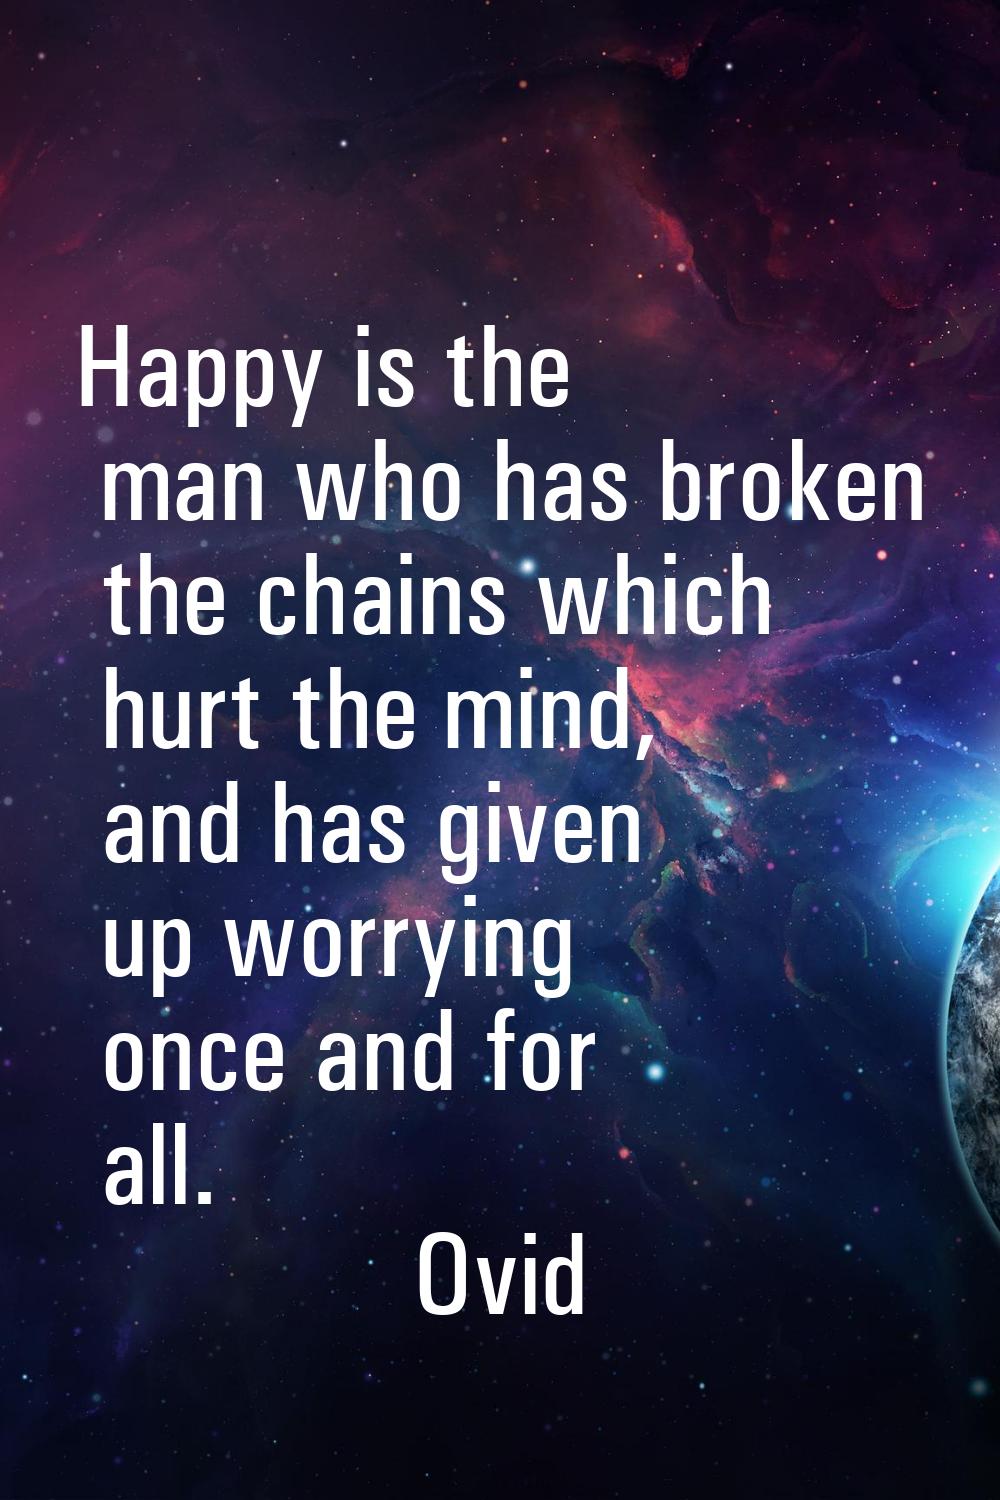 Happy is the man who has broken the chains which hurt the mind, and has given up worrying once and 